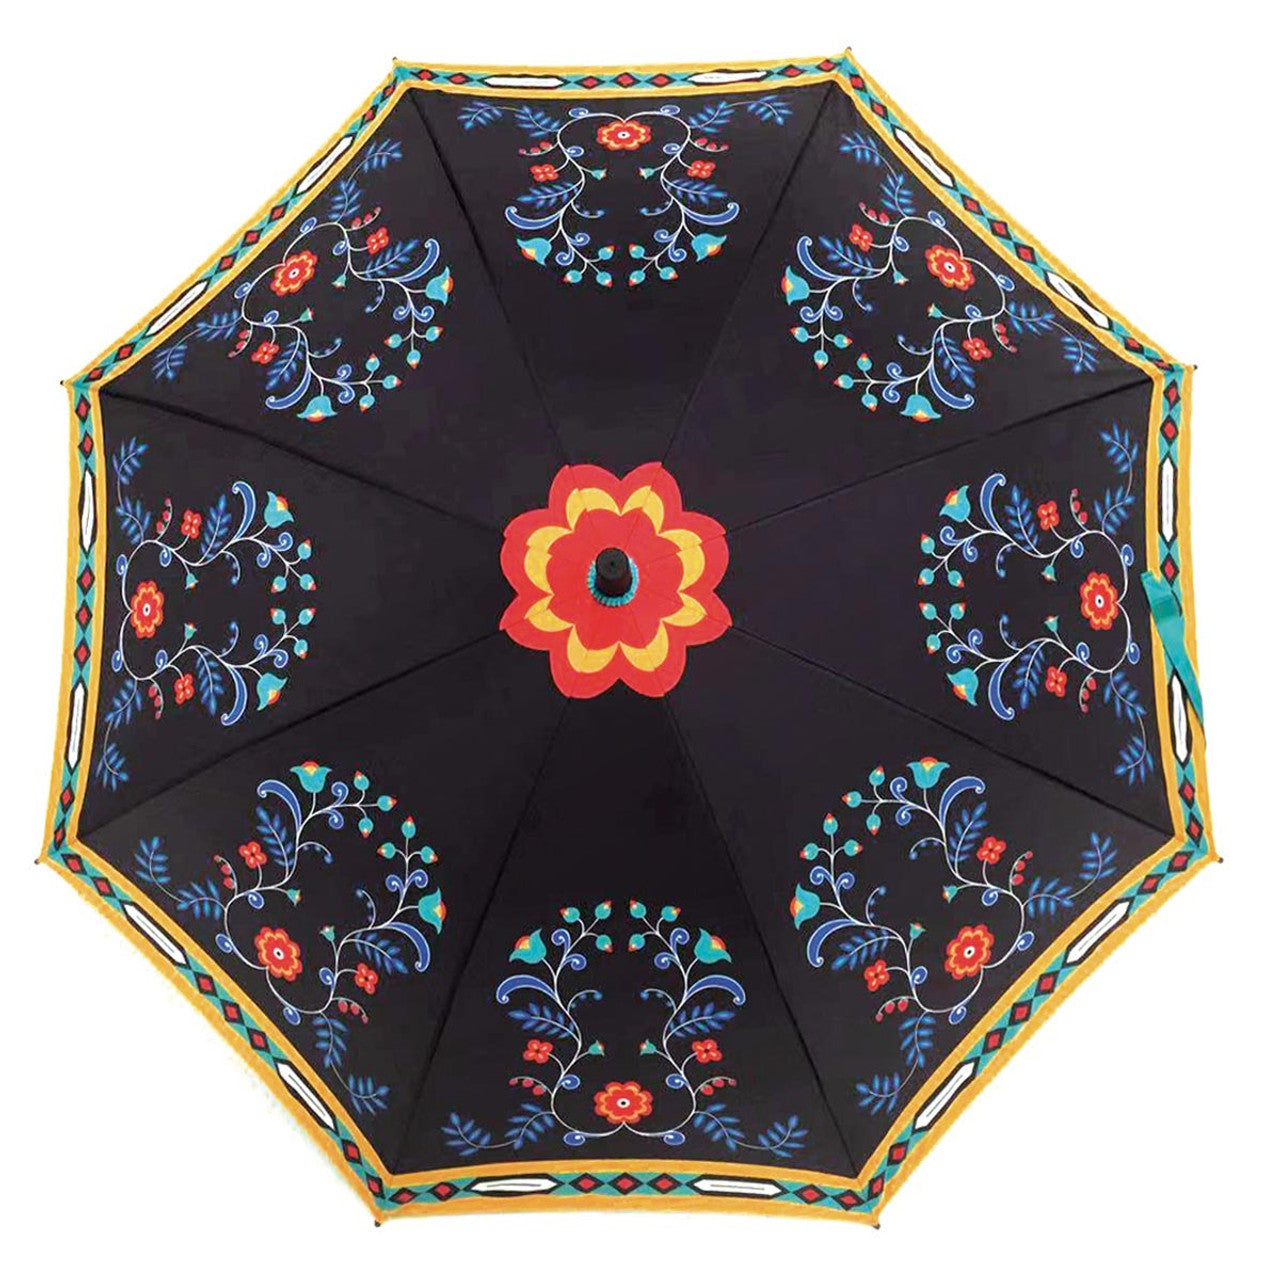 Double Layer Umbrella, Honoring Our Life Givers - Chrysler Museum Shop